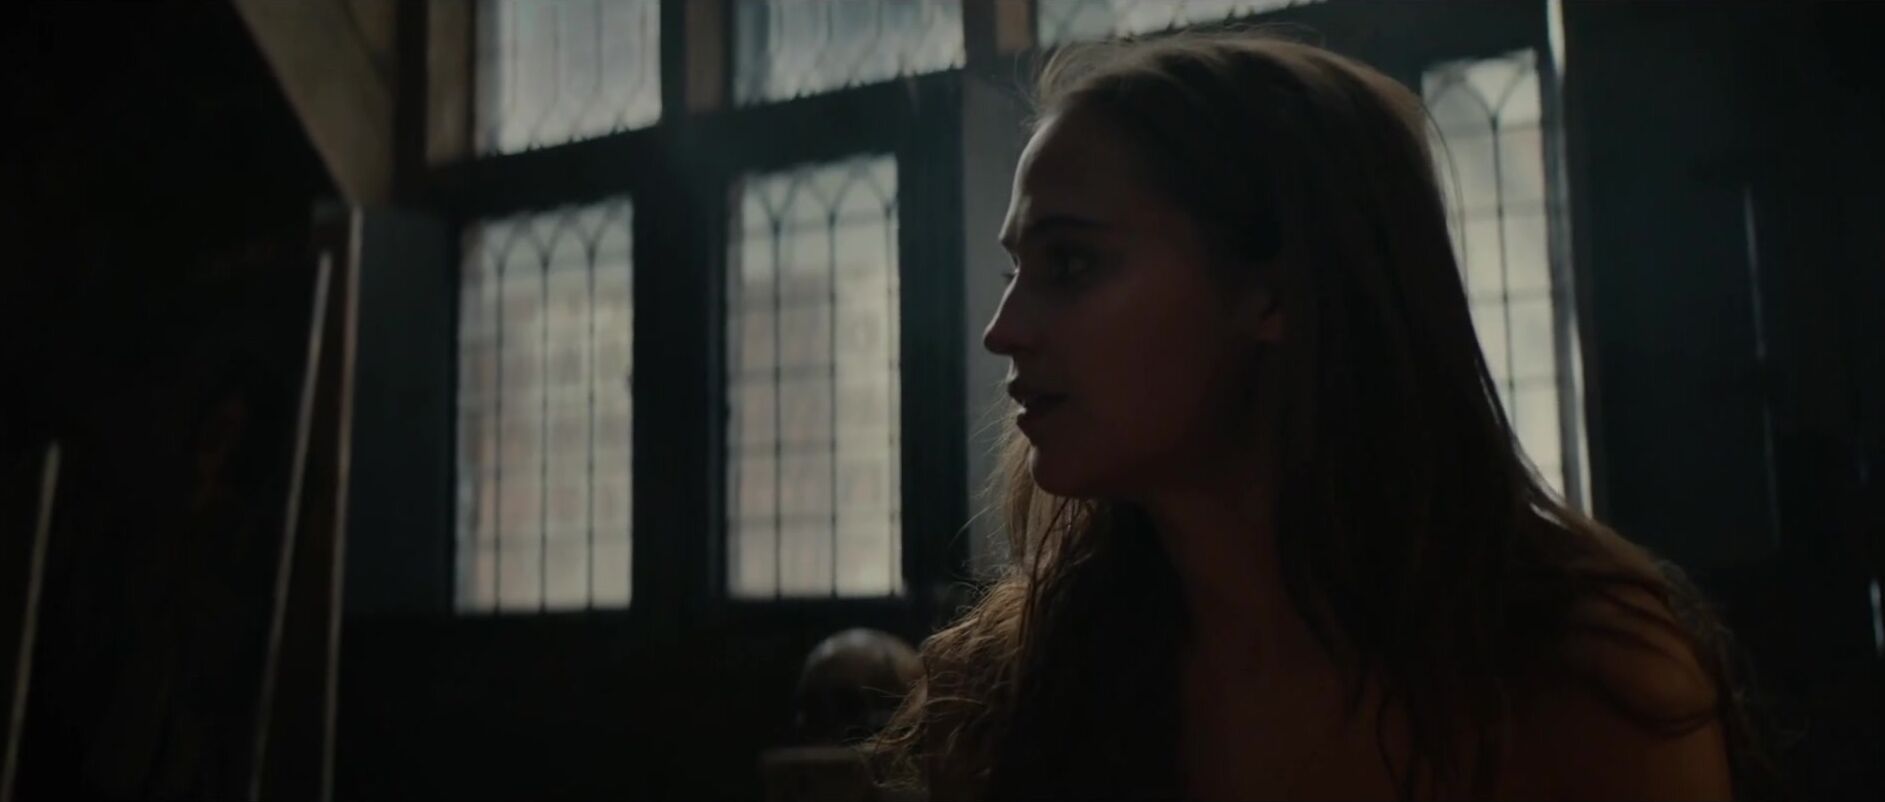 Blows Hot sex scenes of Alicia Vikander and other actresses being penetrated in Tulip Fever Spooning